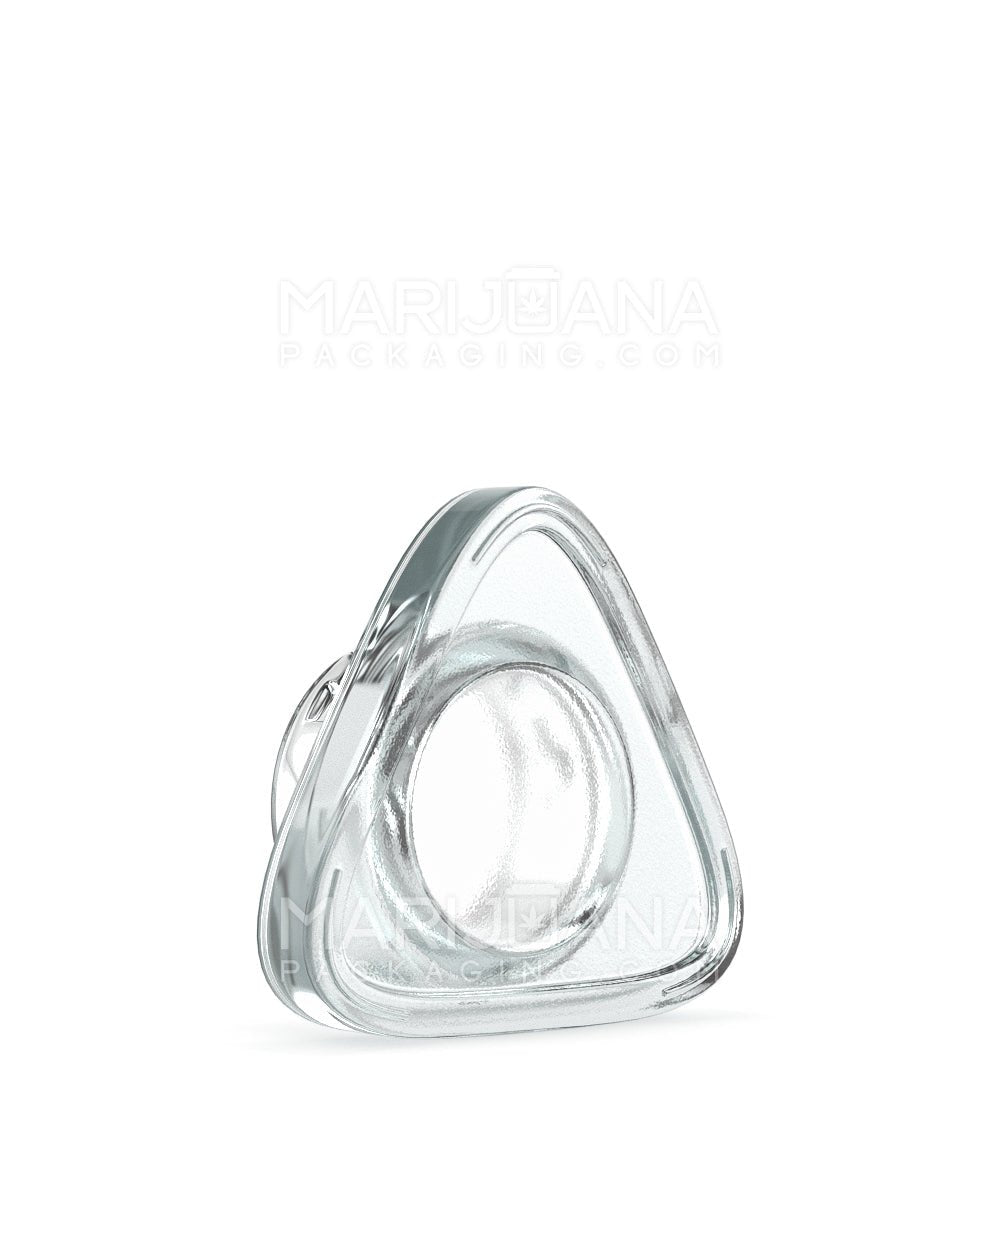 Child Resistant | Clear Glass Triangle Concentrate Jar w/ Black Cap | 24mm - 5mL - 240 Count - 6